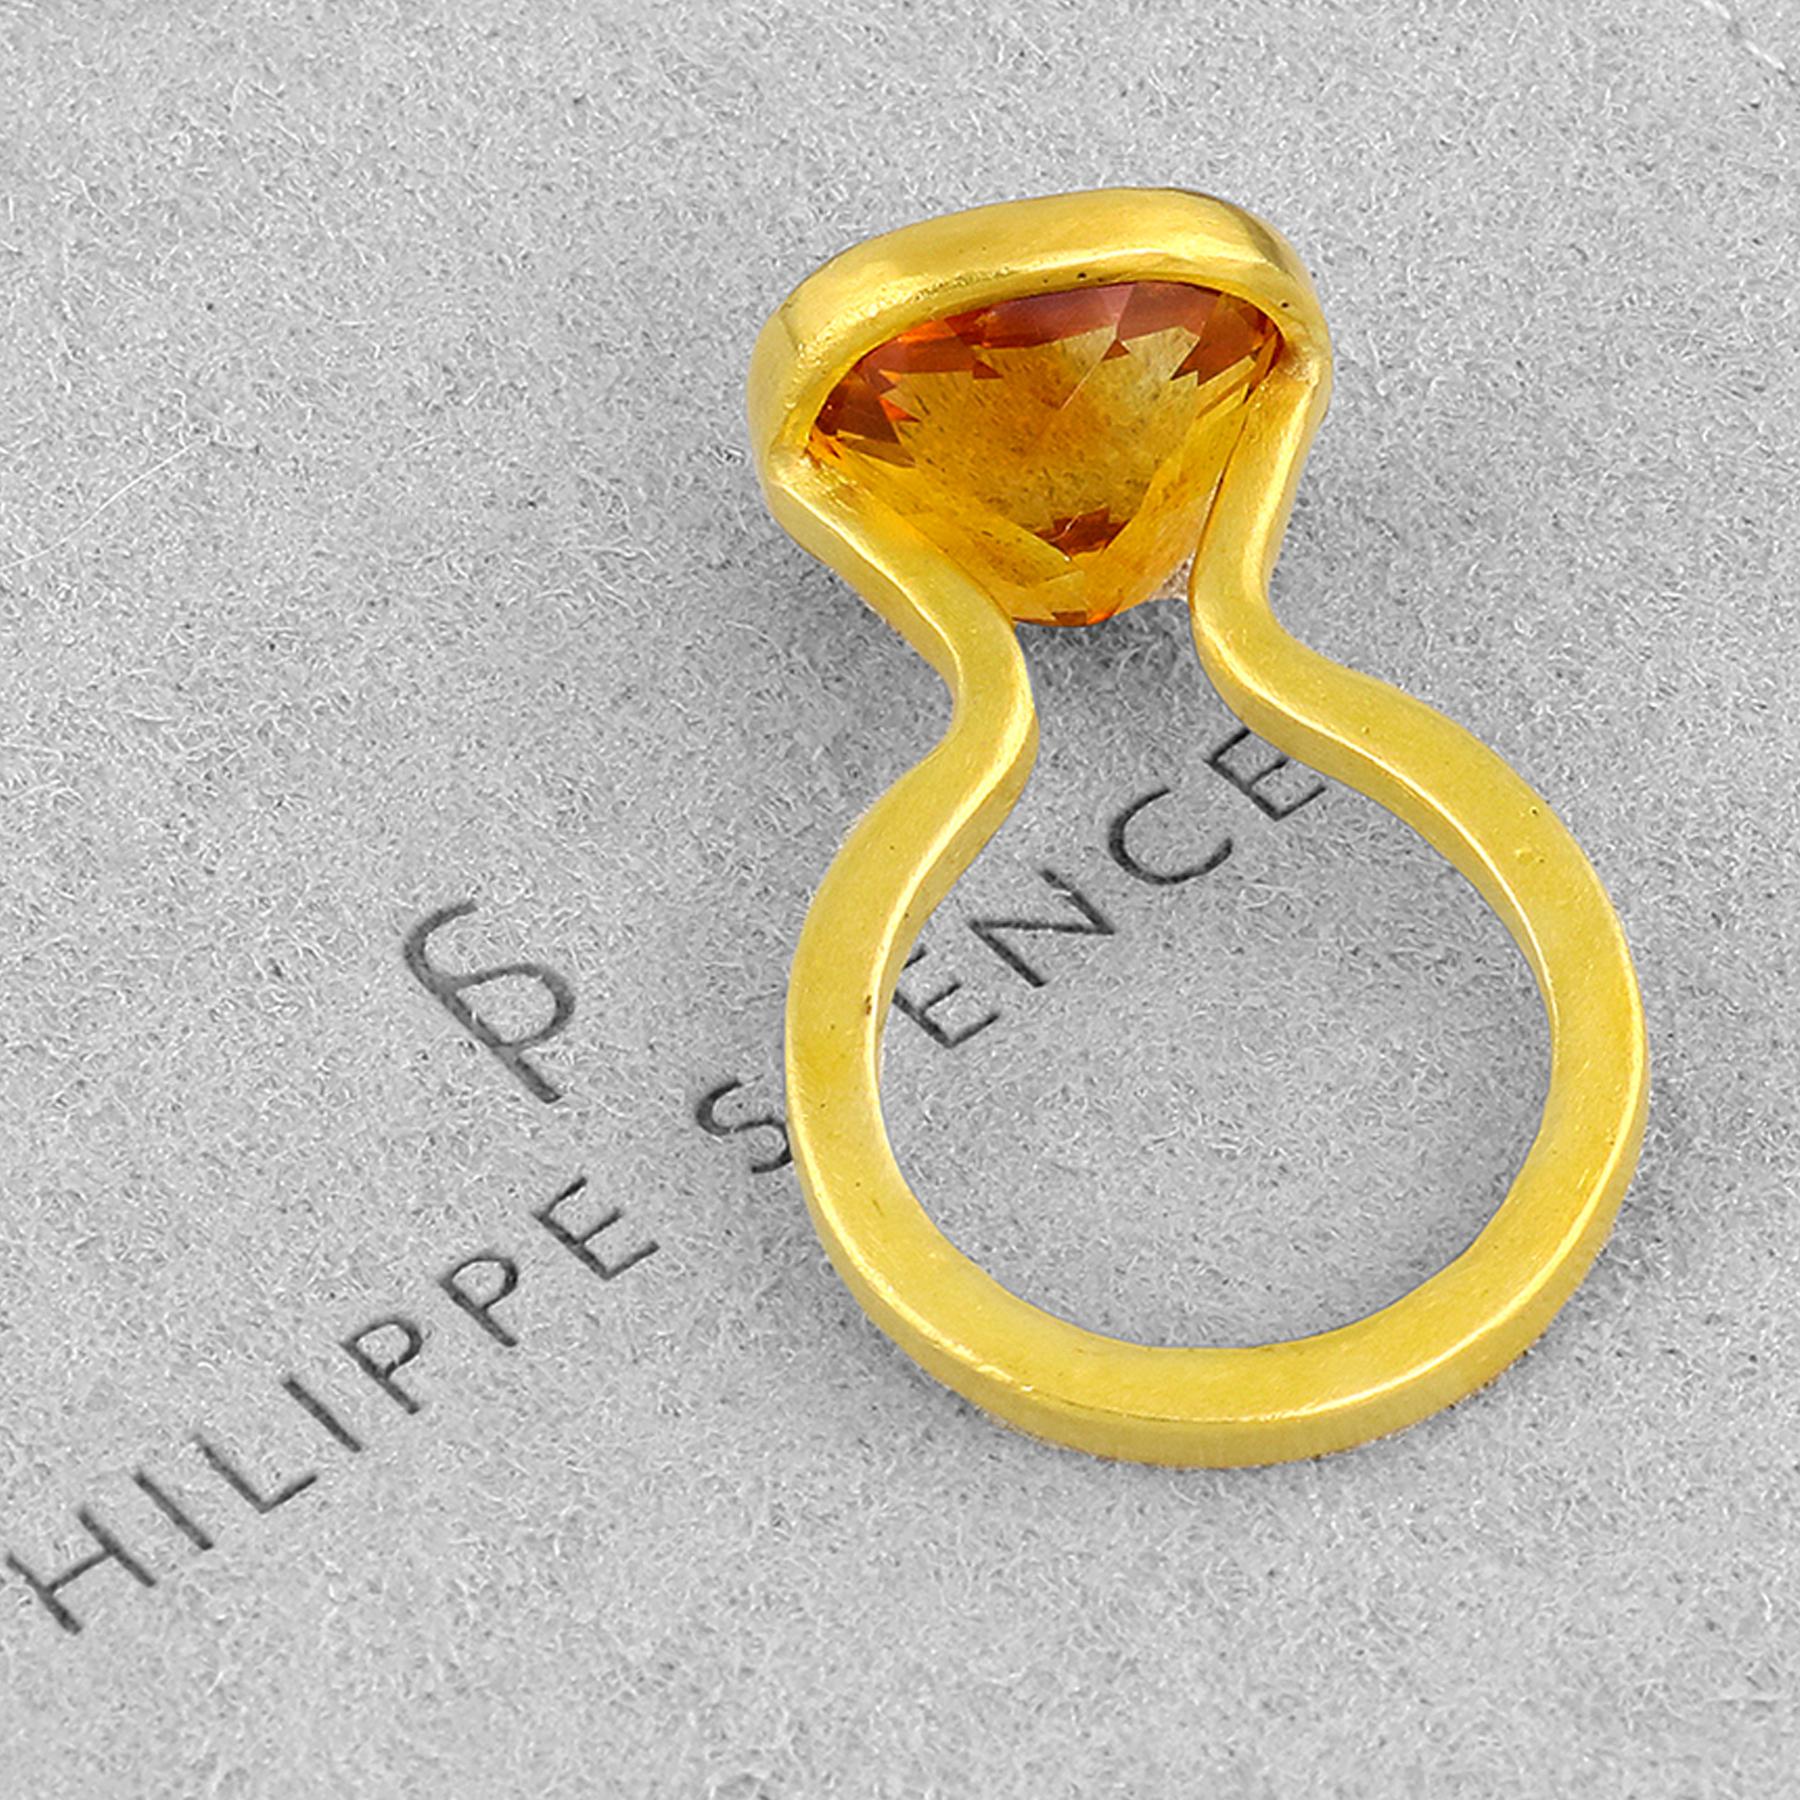 PHILIPPE SPENCER - 9.2 Ct.  Cushion Cut Gold Citrine set in backless 22K Gold, with Solid 20K Gold Hand & Anvil Forged Statement Ring. Heavy-Brushed Exterior,  Polished Interior Finish. Size 5 1/4, and is in-stock and ready to ship. Our apologies in